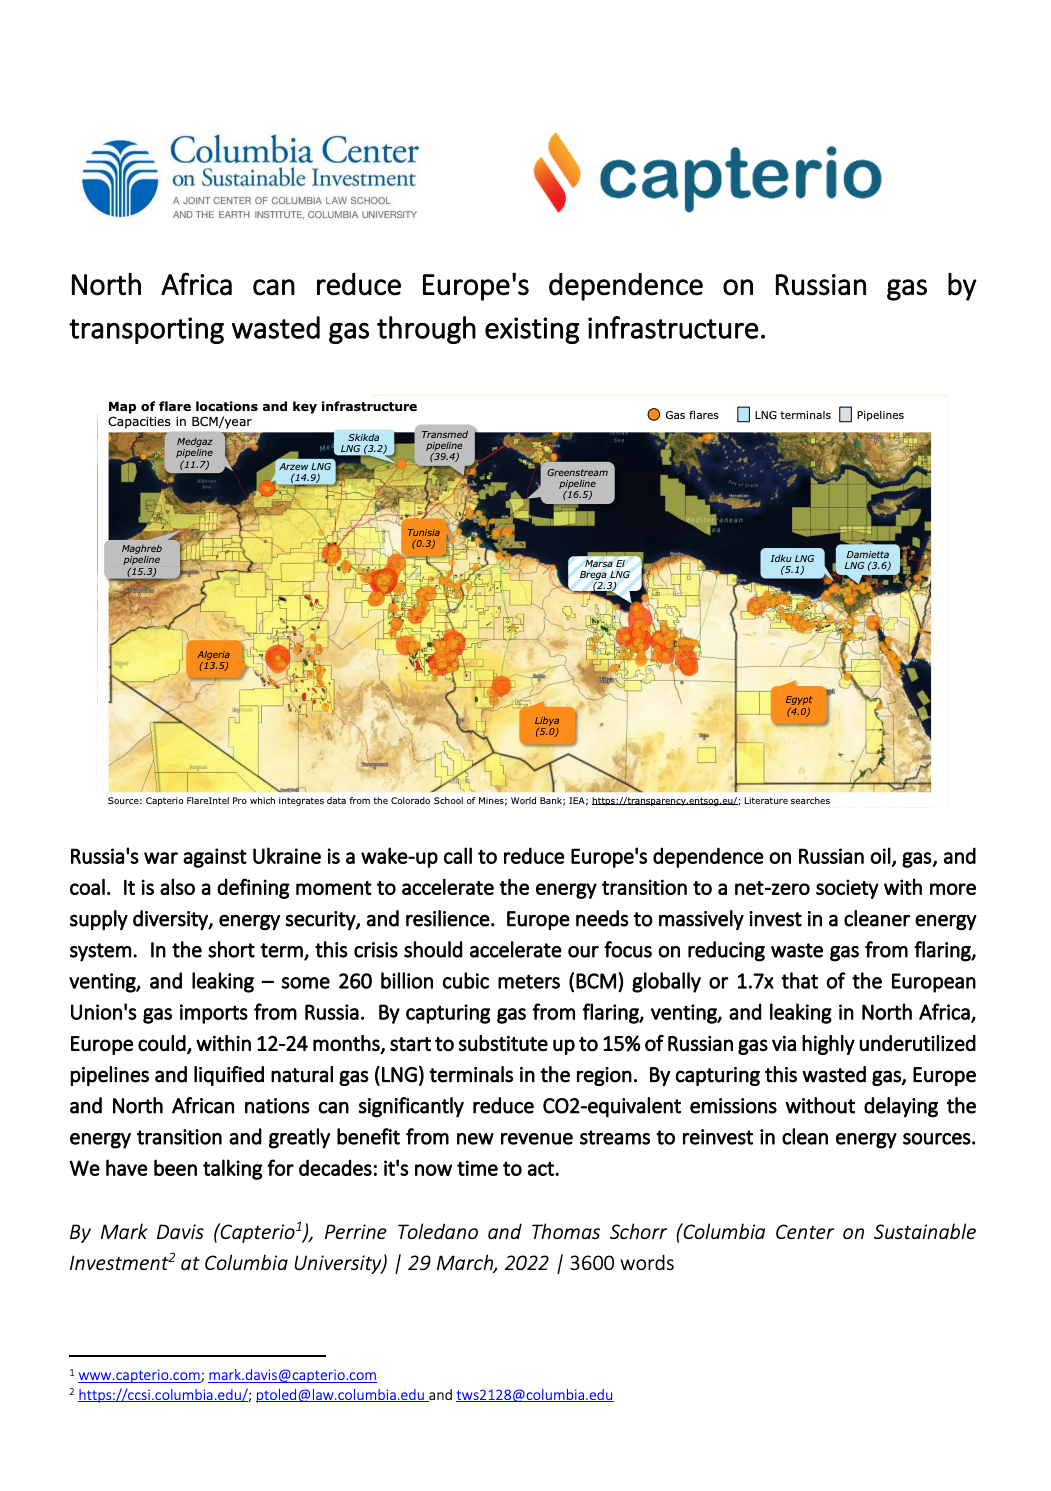 "North Africa can reduce Europe's dependence on Russian gas by transporting wasted gas through existing infrastructure" publication cover